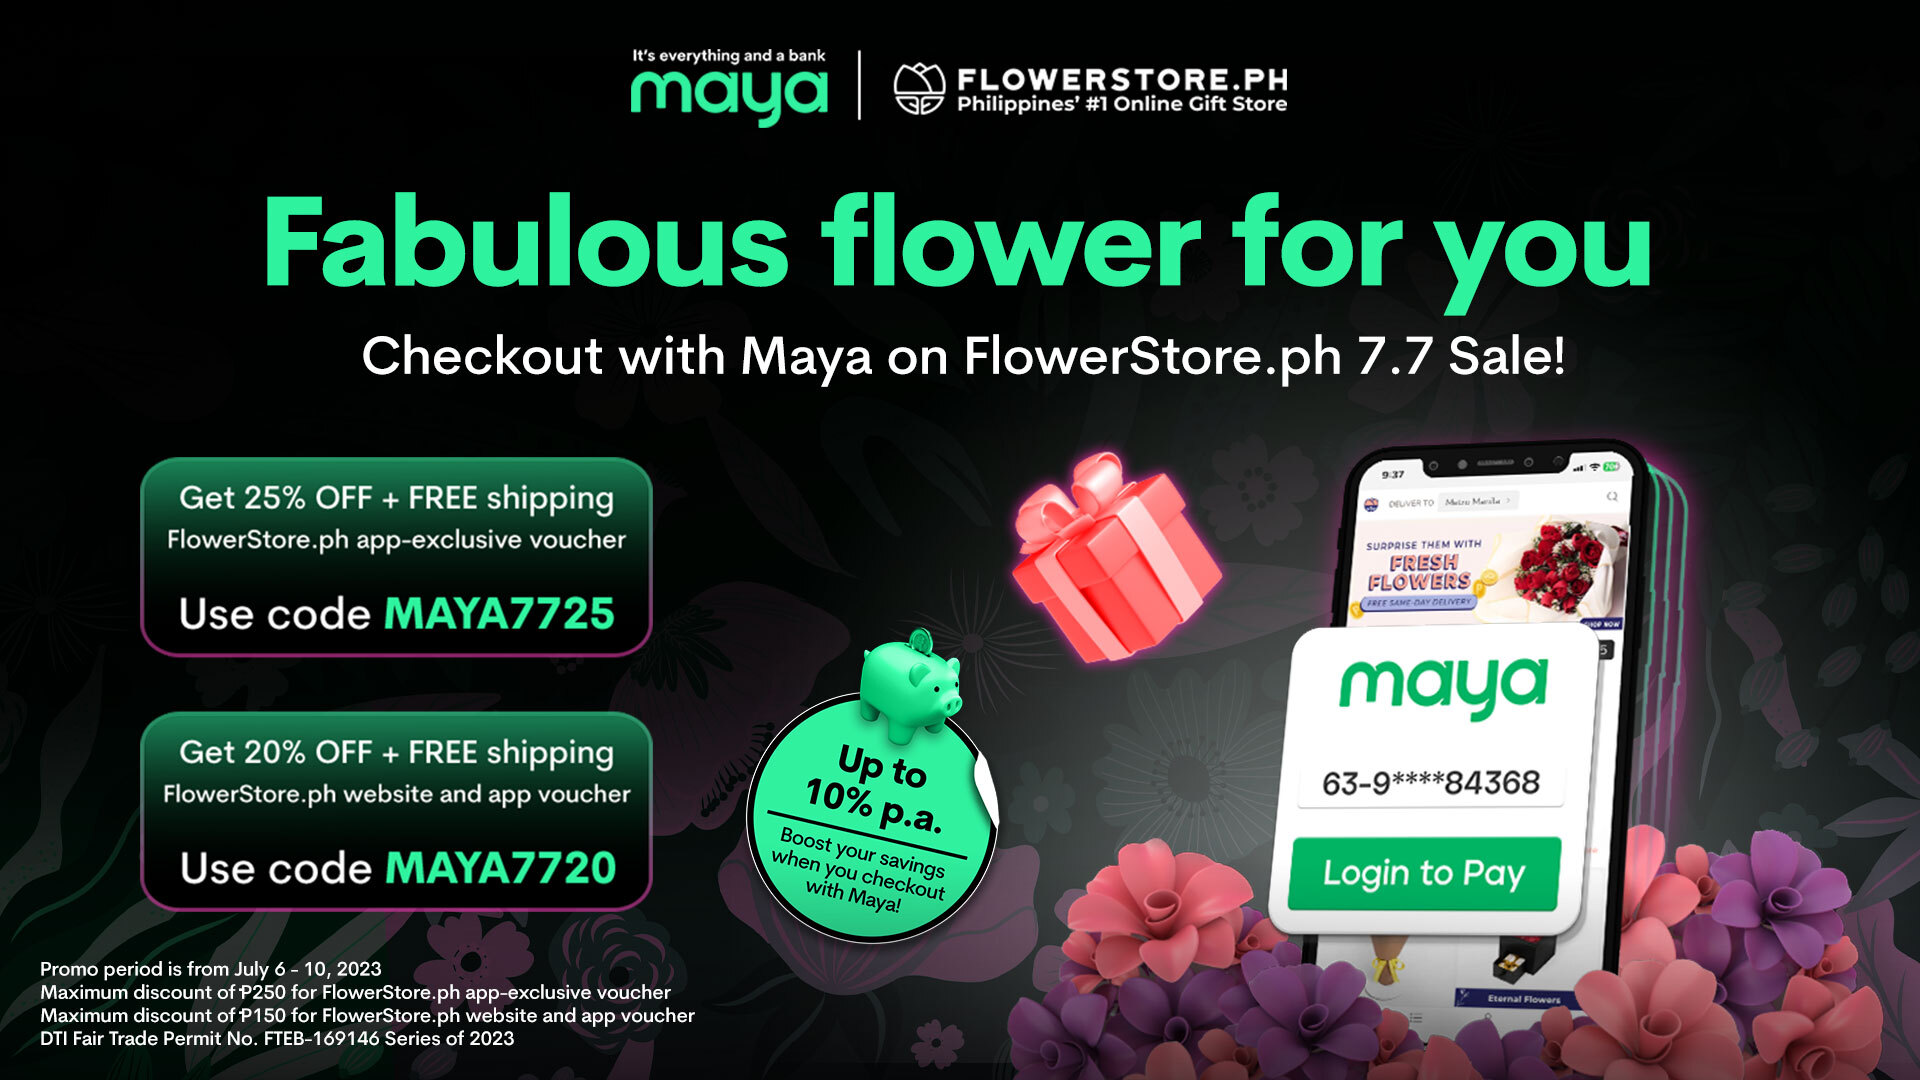 Share your love with FlowerStore.ph